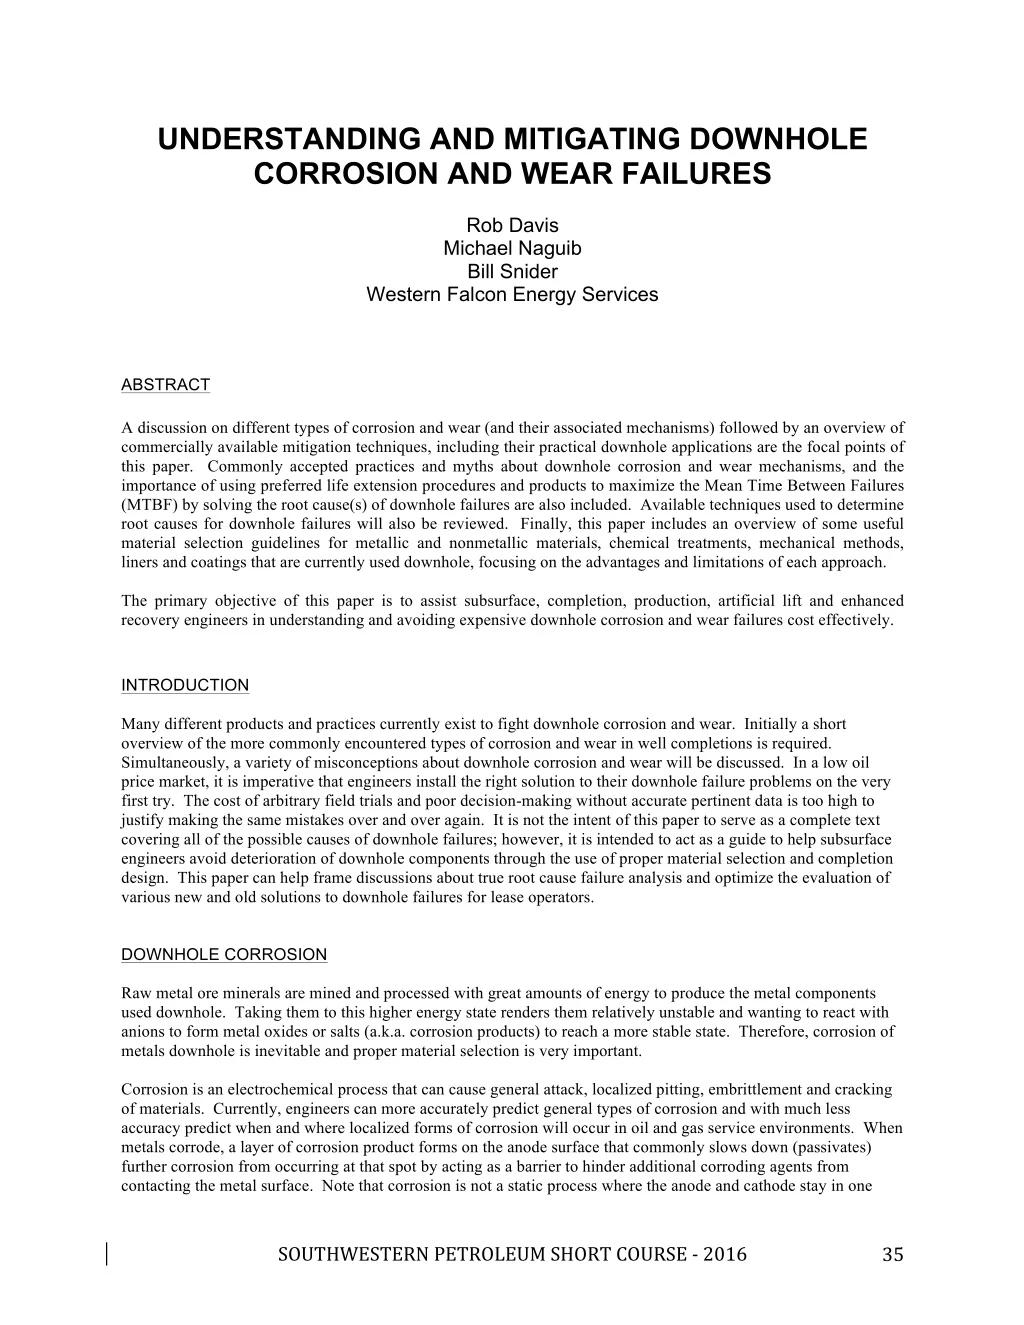 understanding and mitigating downhole corrosion